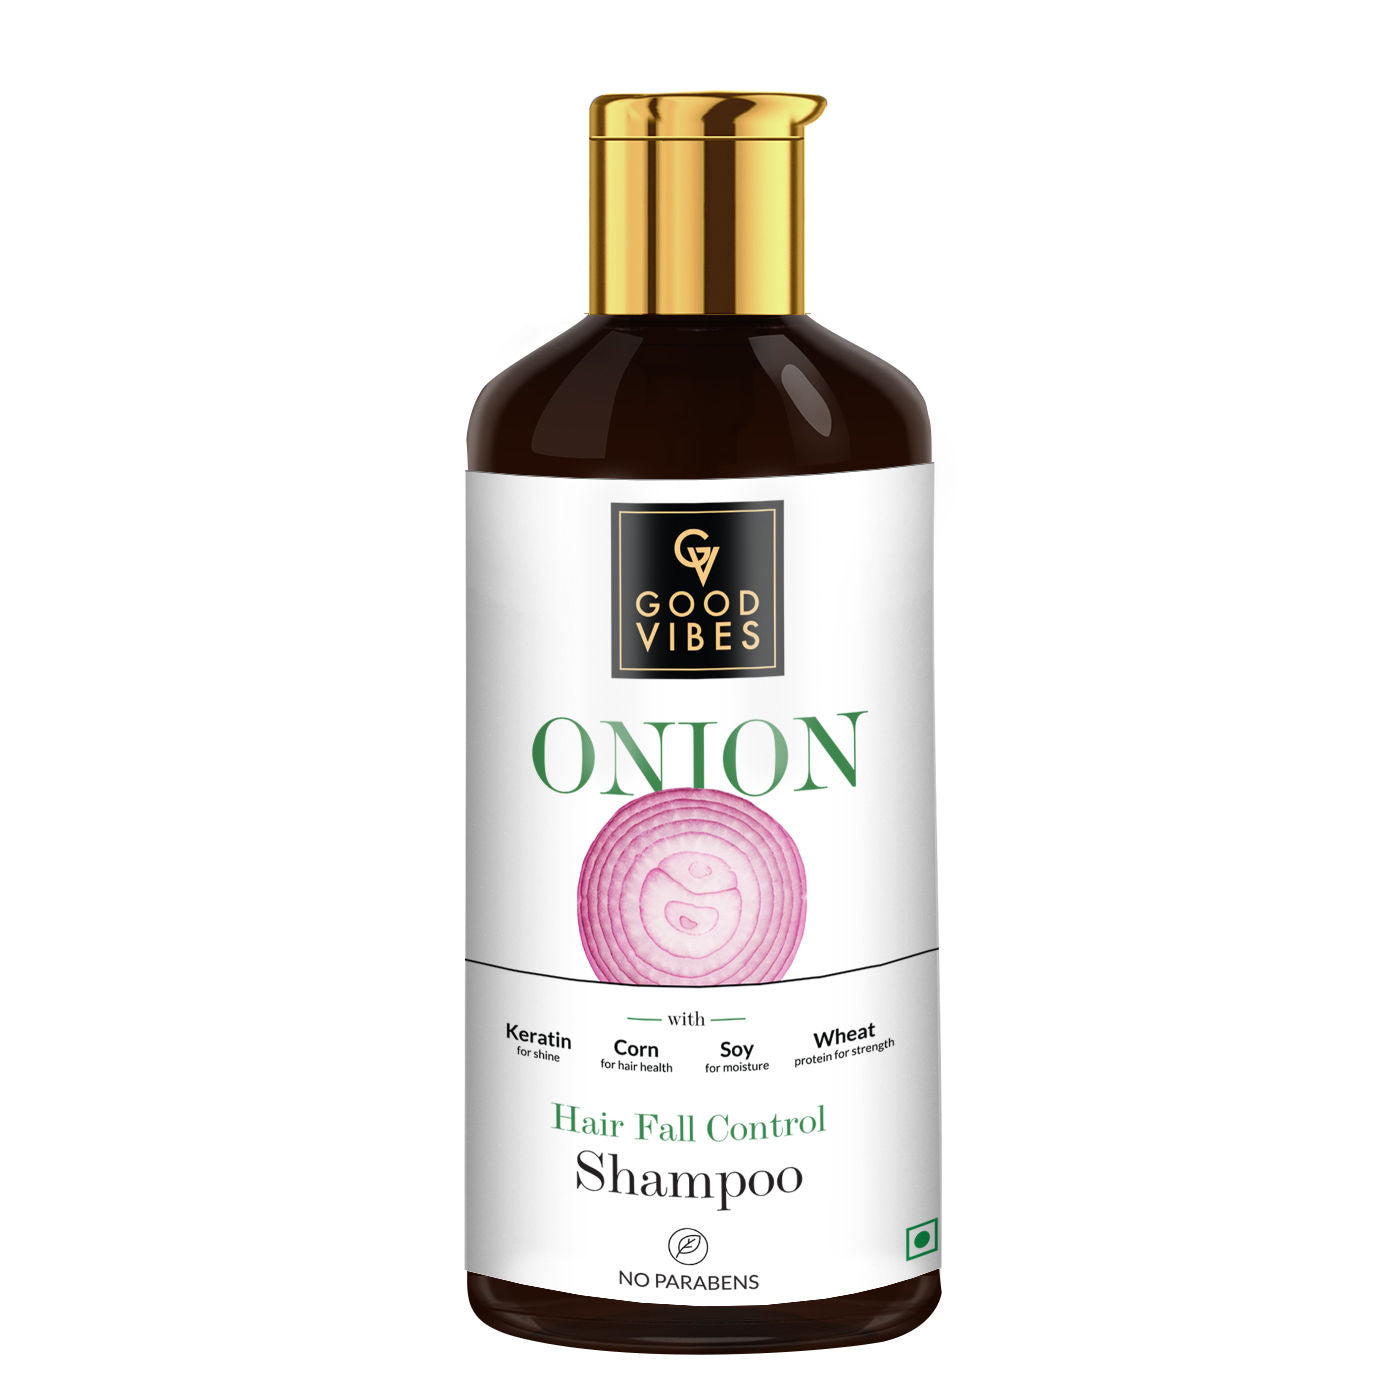 good-vibes-onion-hairfall-control-shampoo-with-keratin-for-shine-corn-for-hair-health-wheat-protein-for-strength-and-soy-for-moisture-300-ml-1-89-8